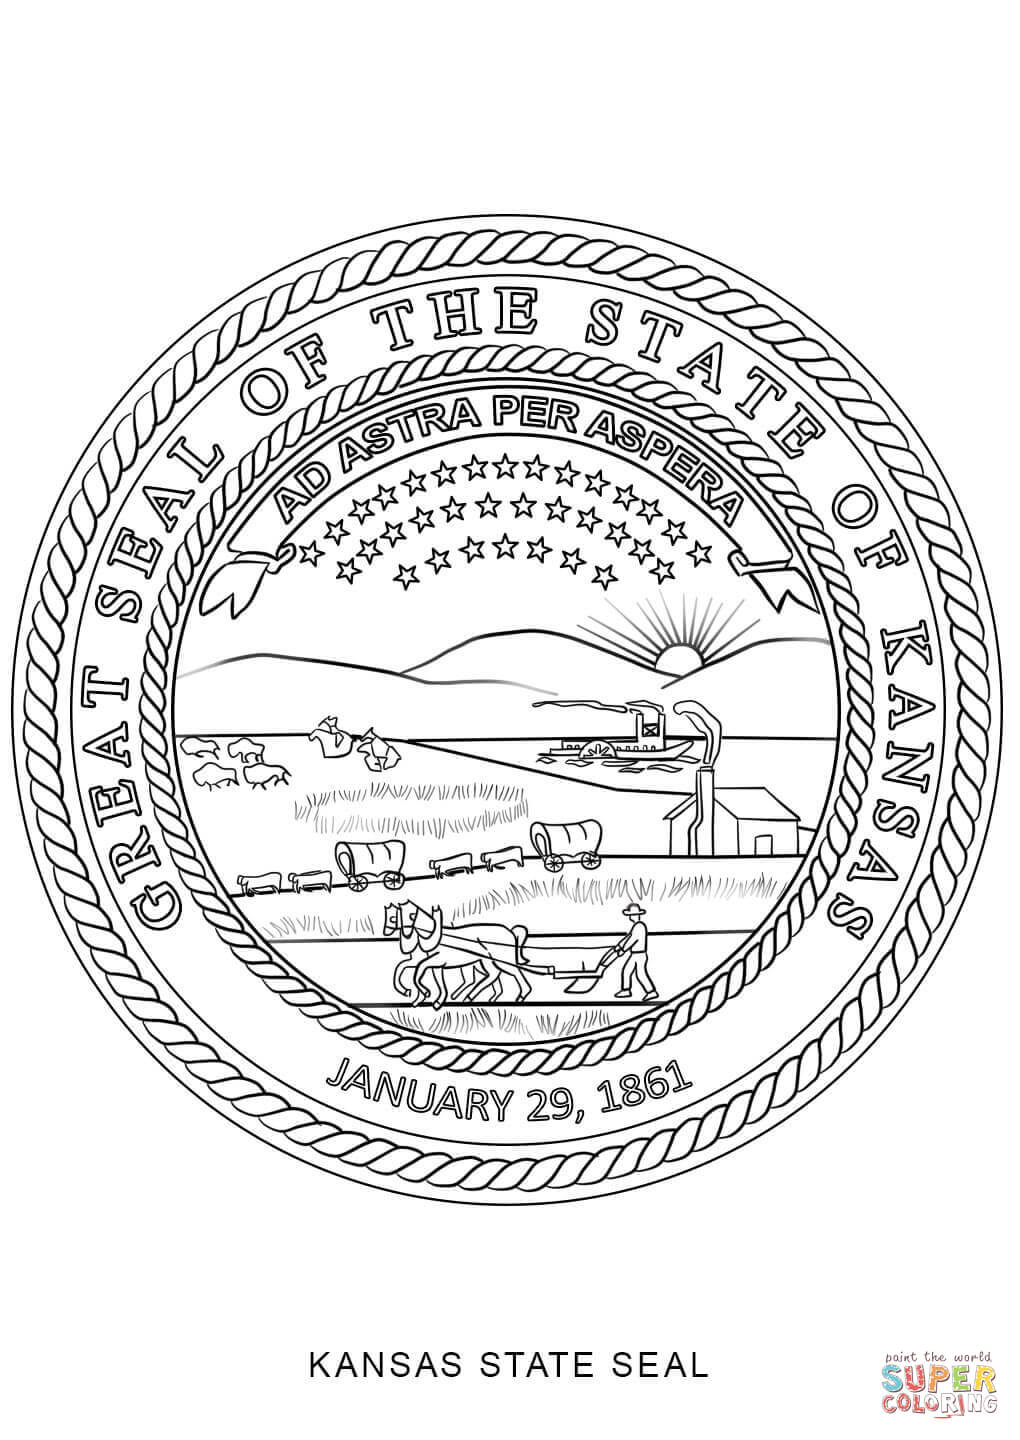 Kansas State Seal coloring page | Free Printable Coloring Pages